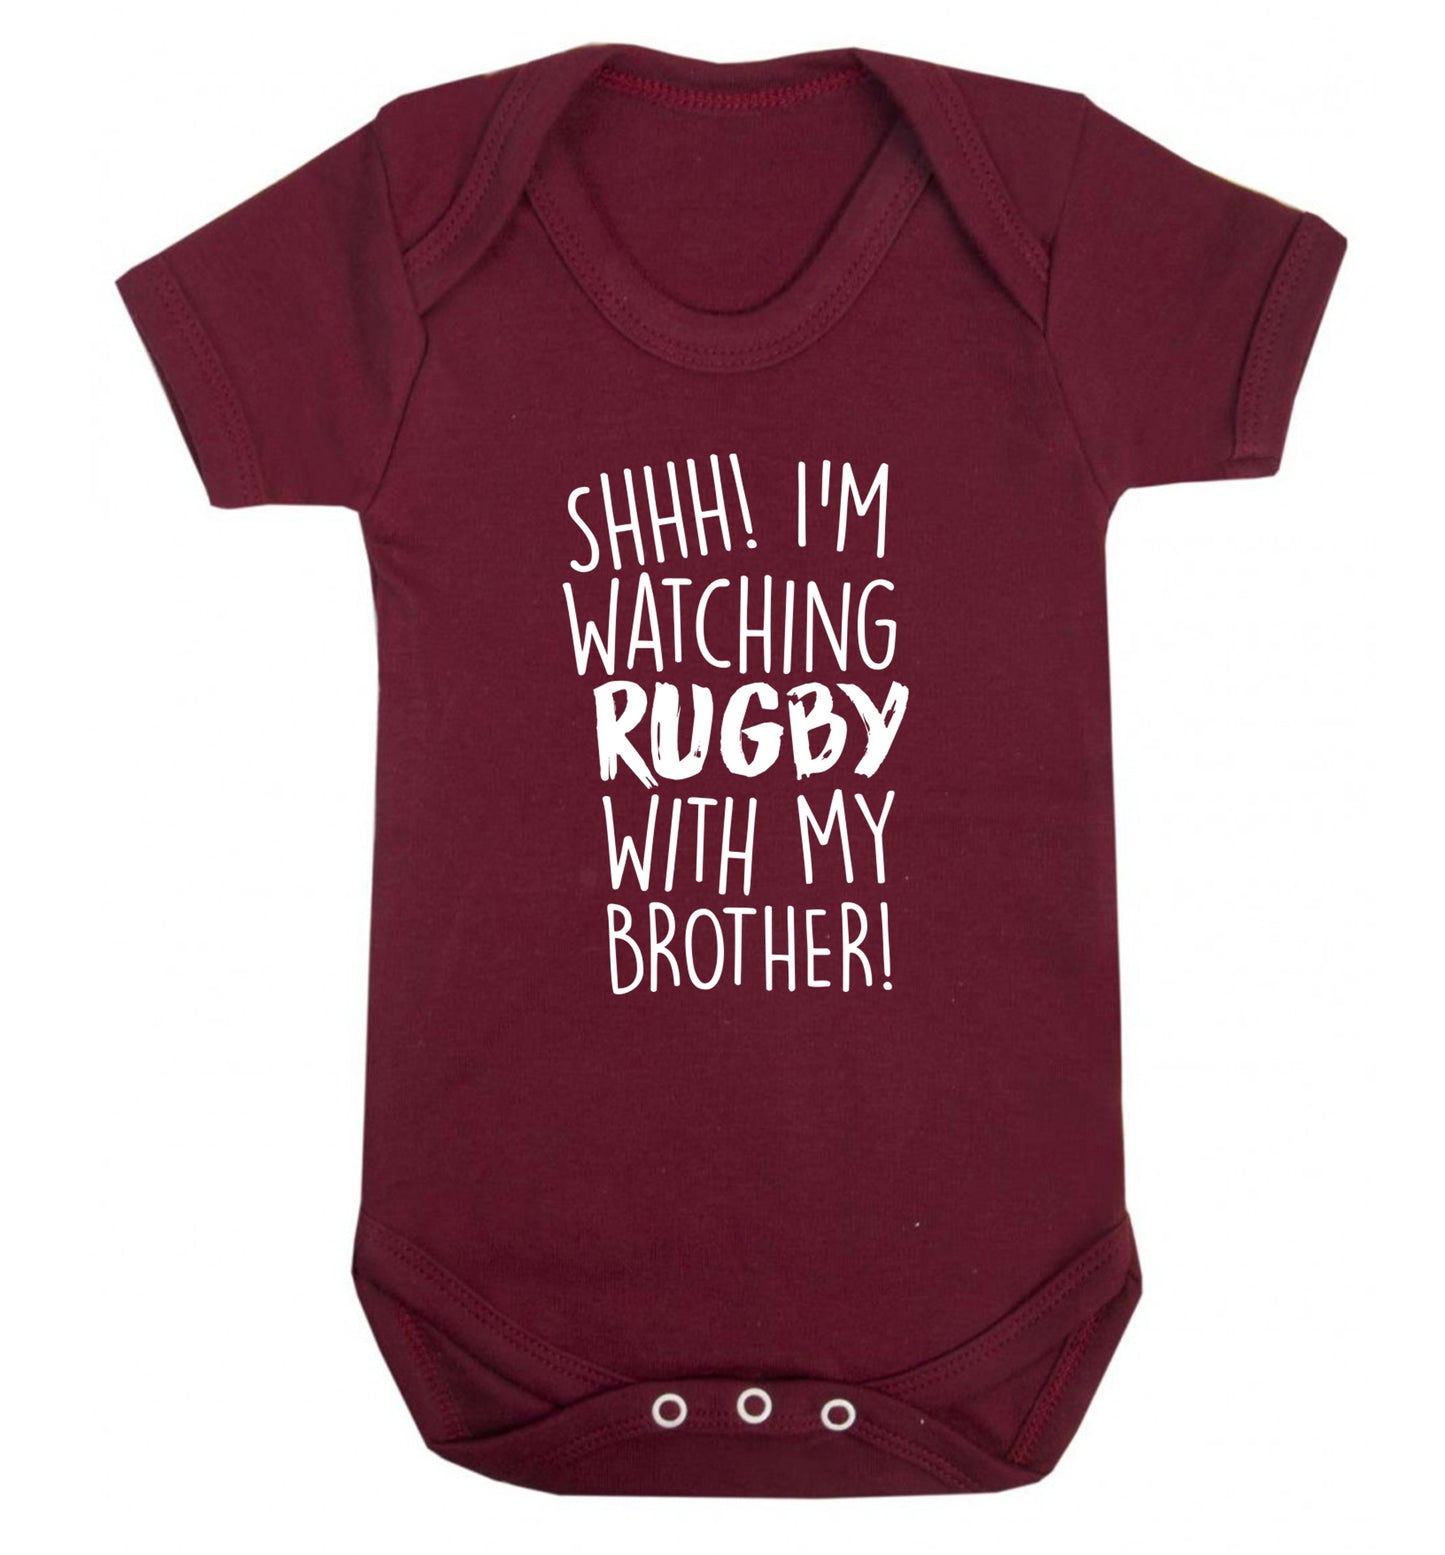 Shh... I'm watching rugby with my brother Baby Vest maroon 18-24 months